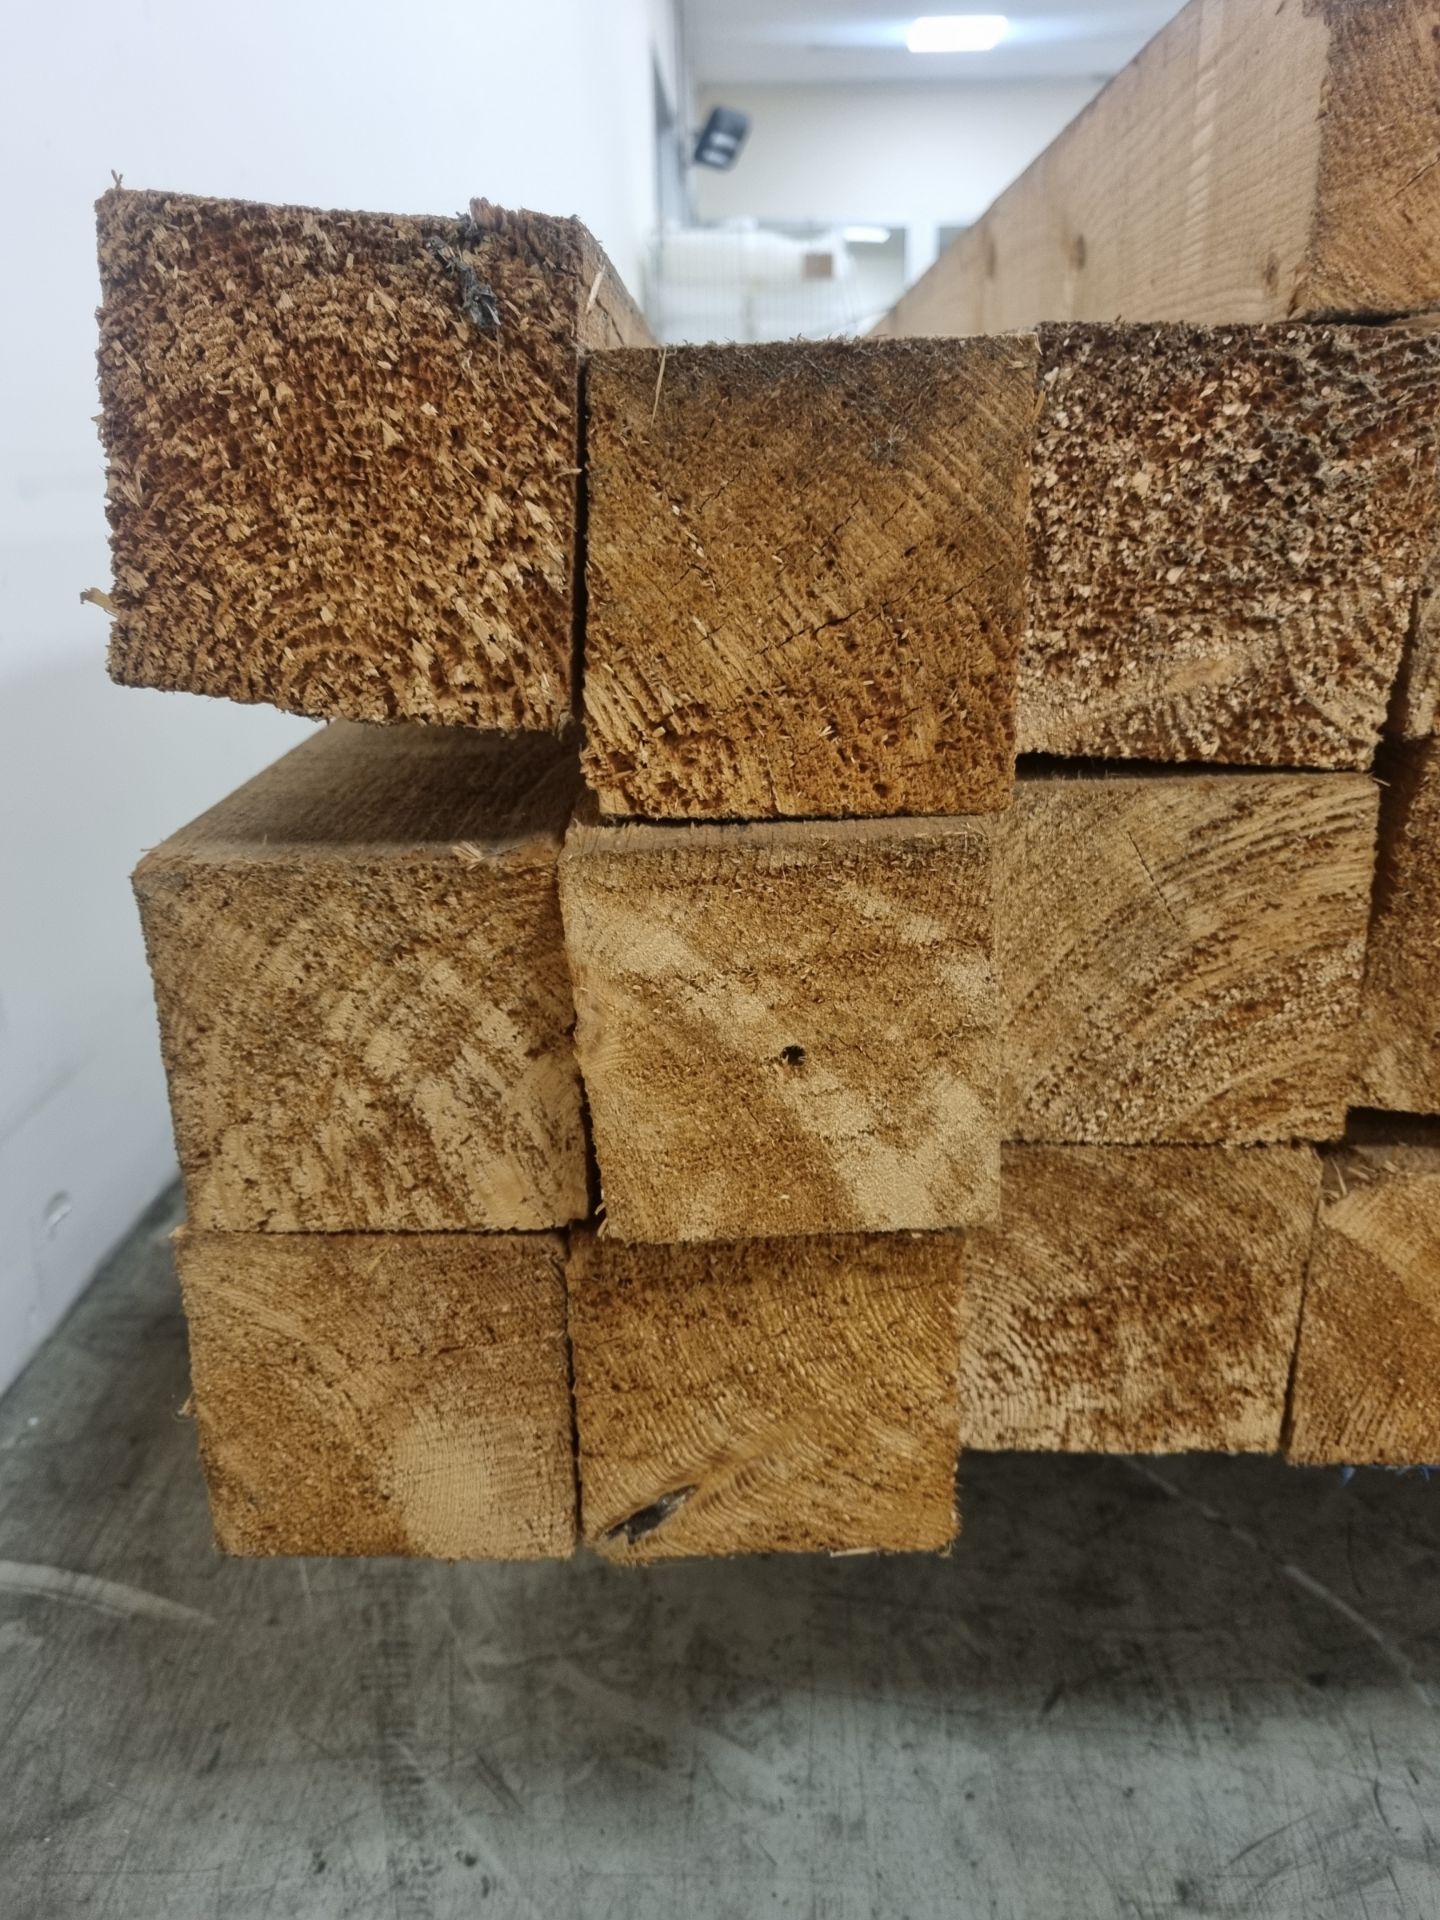 Pallet of 4"x4" (10x10cm) softwood, heat treated and debarked (GBFC-0452 DBHT) L420cm x 43 pcs - Image 5 of 5